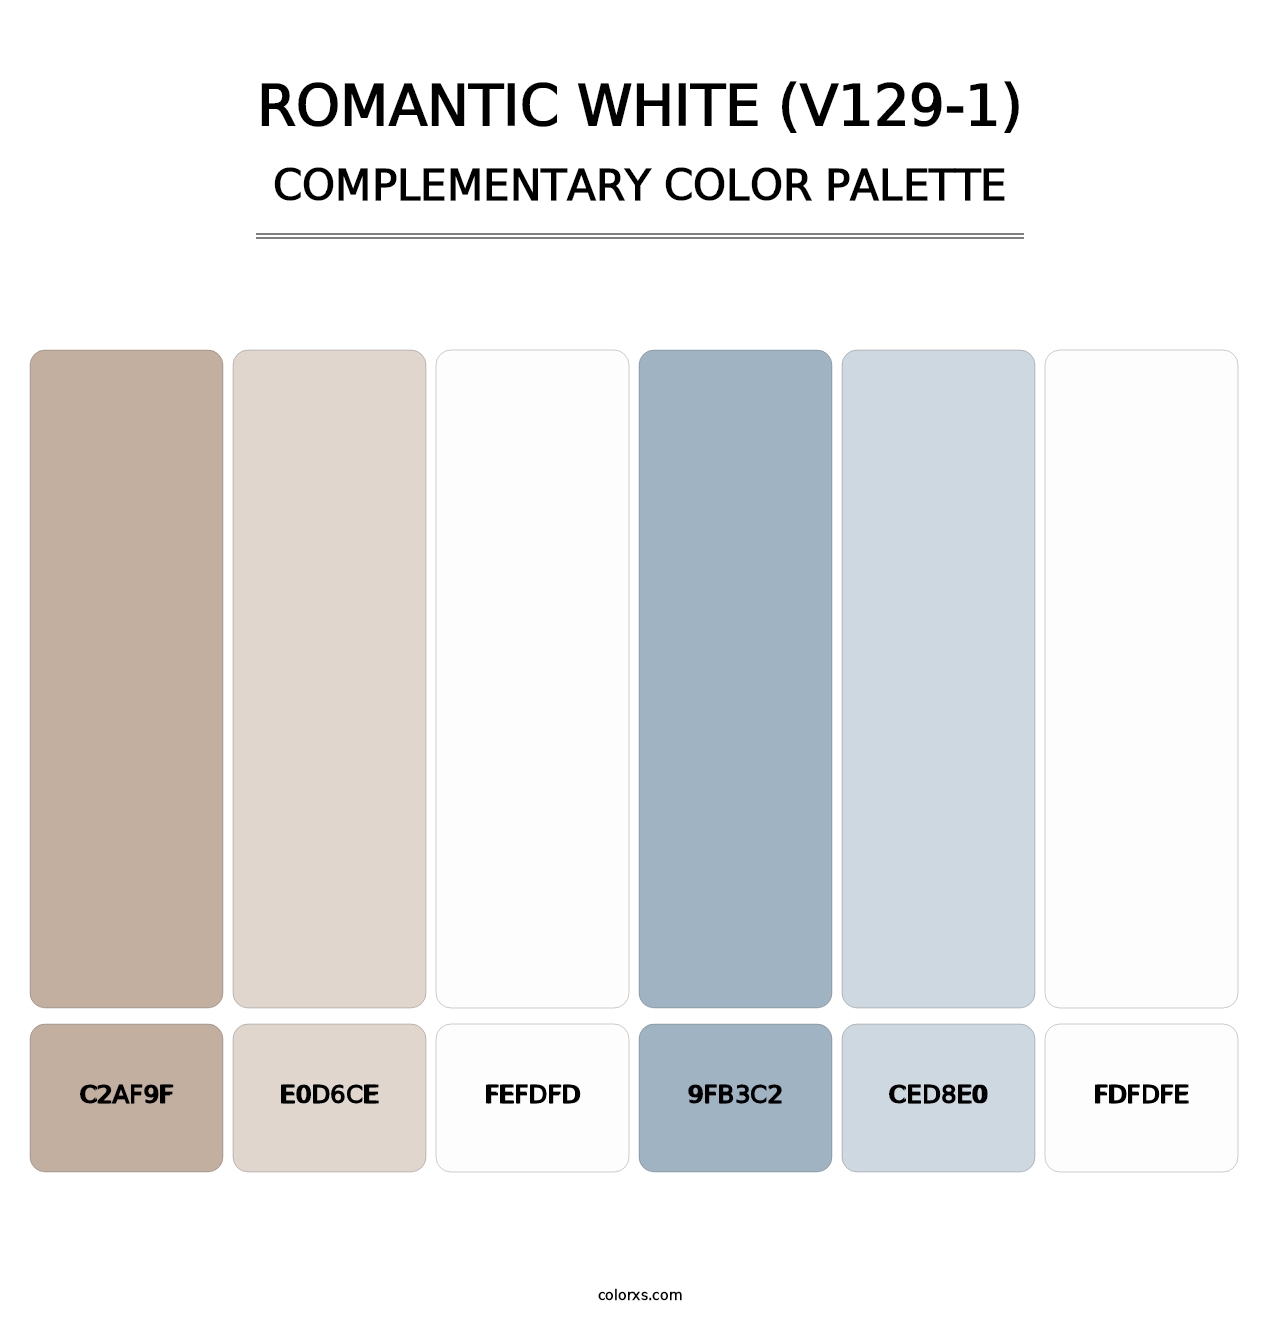 Romantic White (V129-1) - Complementary Color Palette